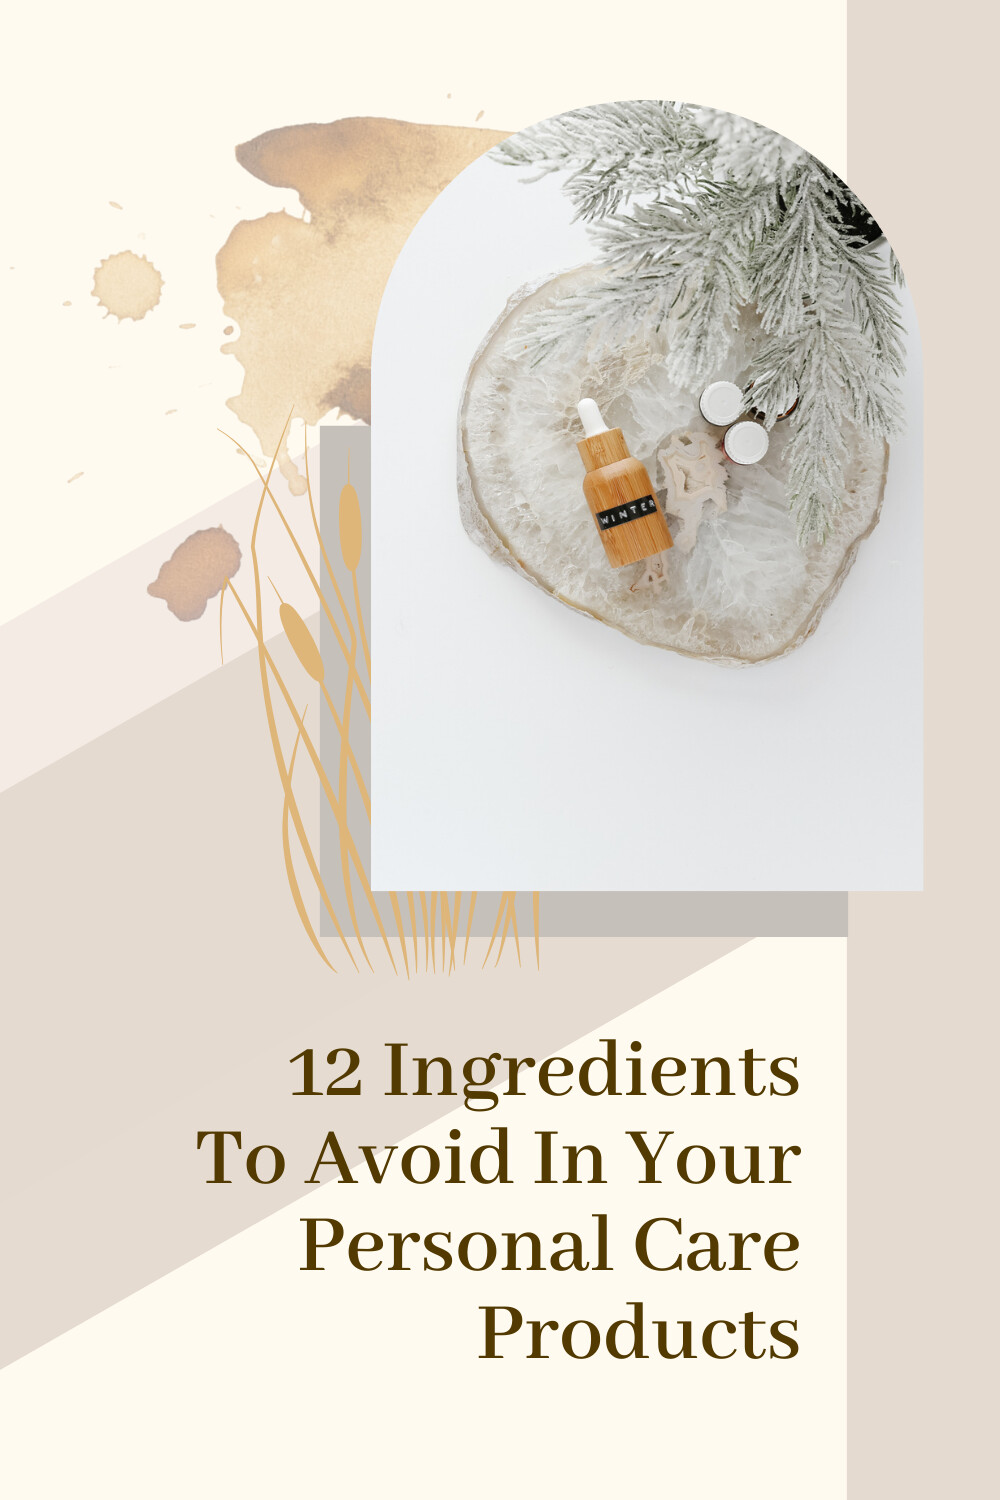 12 Ingredients To Avoid In Your Personal Care Products.